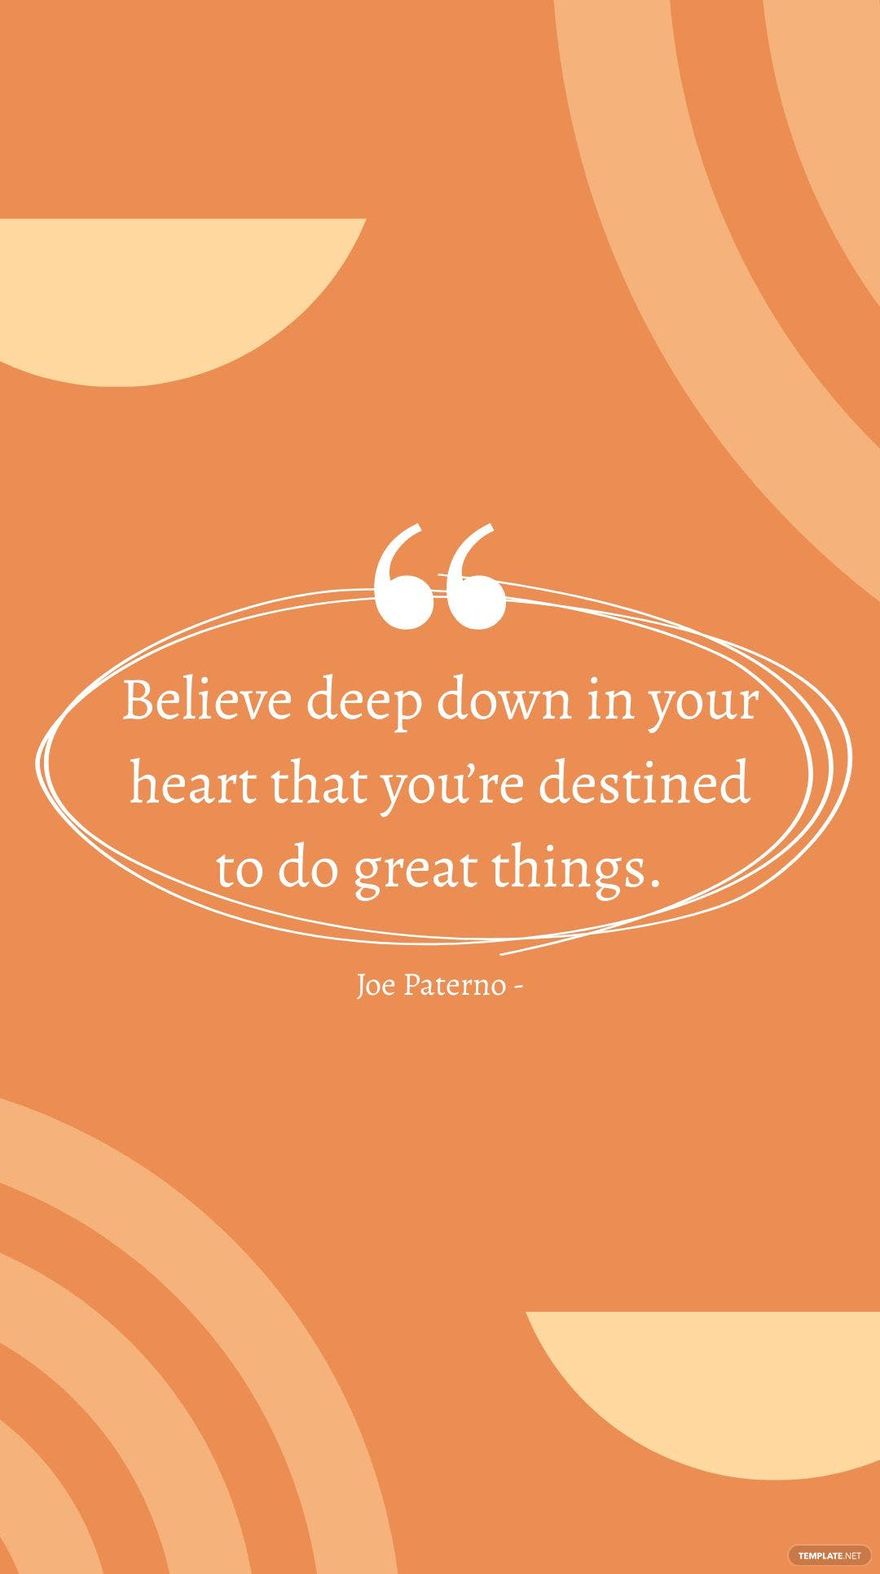 Joe Paterno - Believe deep down in your heart that you’re destined to do great things.